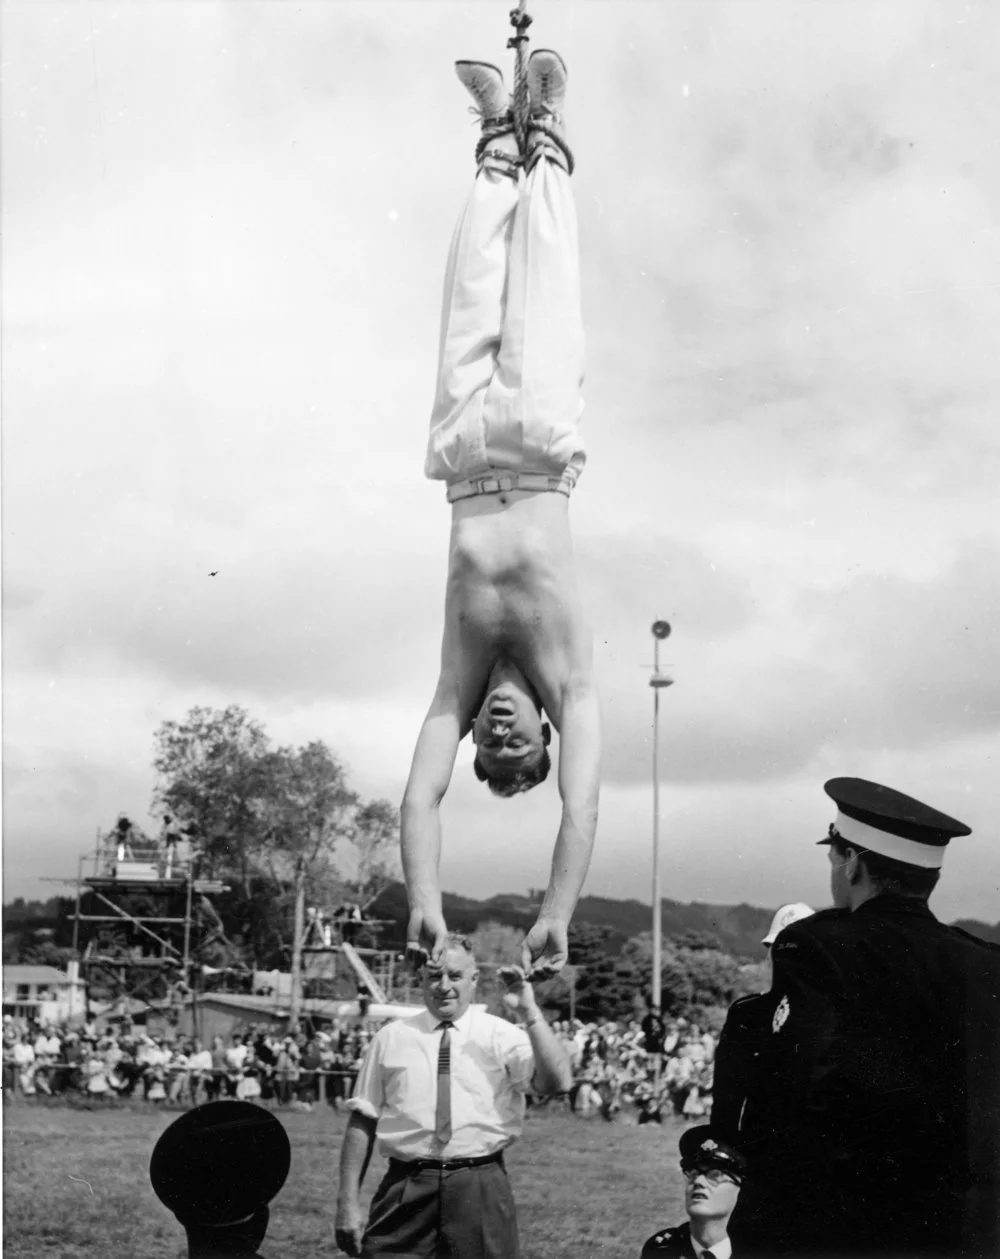 Escapologist at A & P show, Trentham Park 6; lowered from crane.